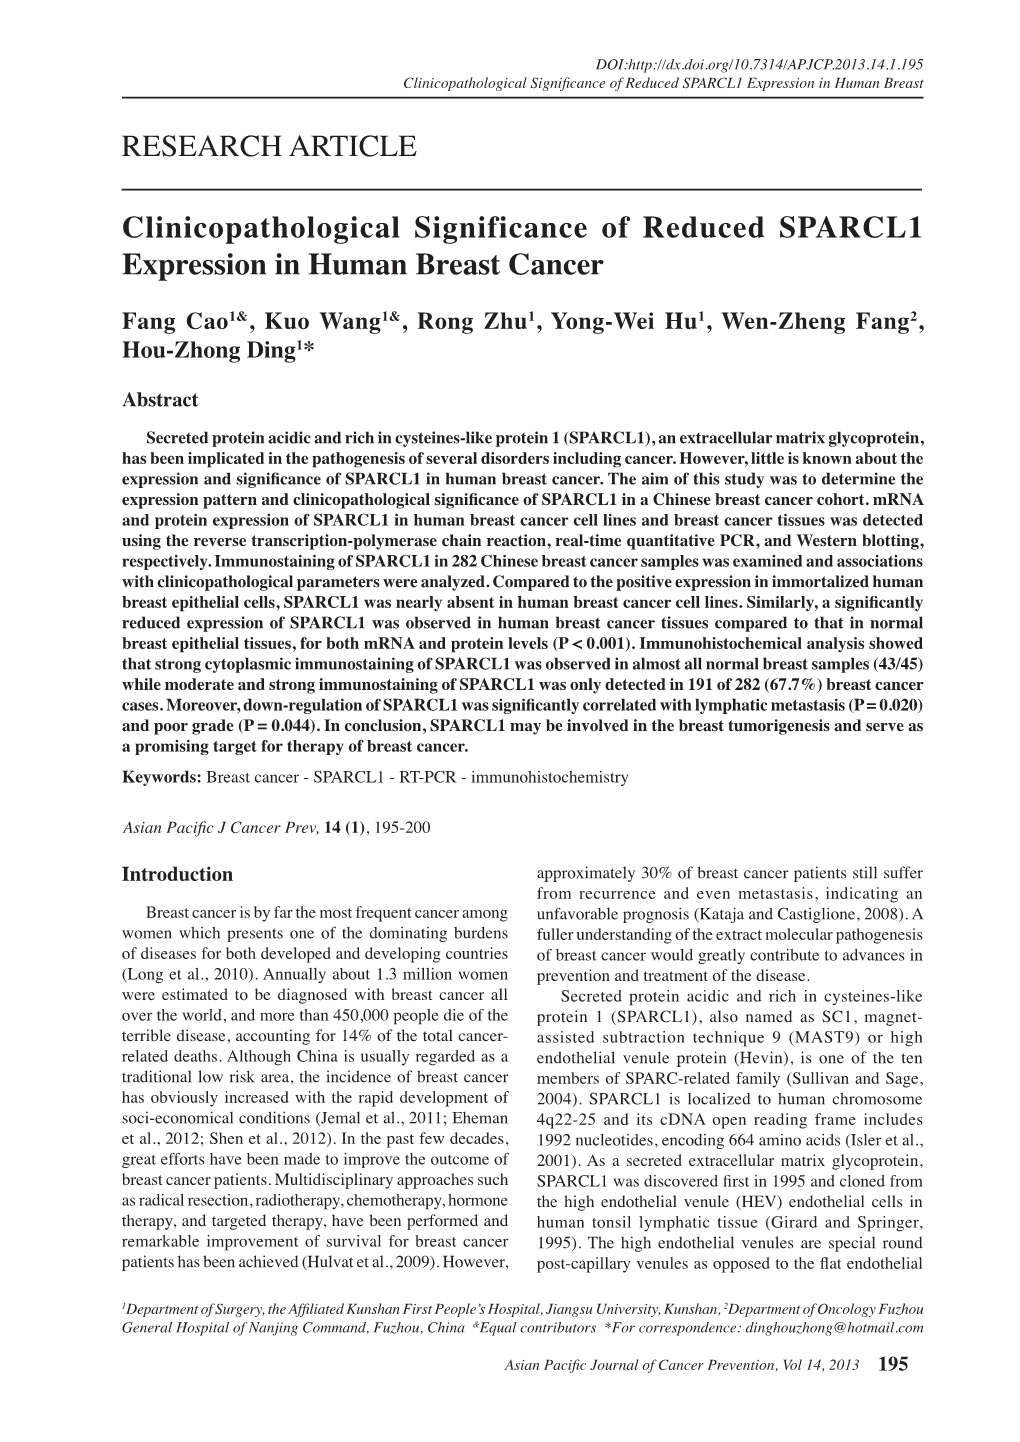 Clinicopathological Significance of Reduced SPARCL1 Expression in Human Breast